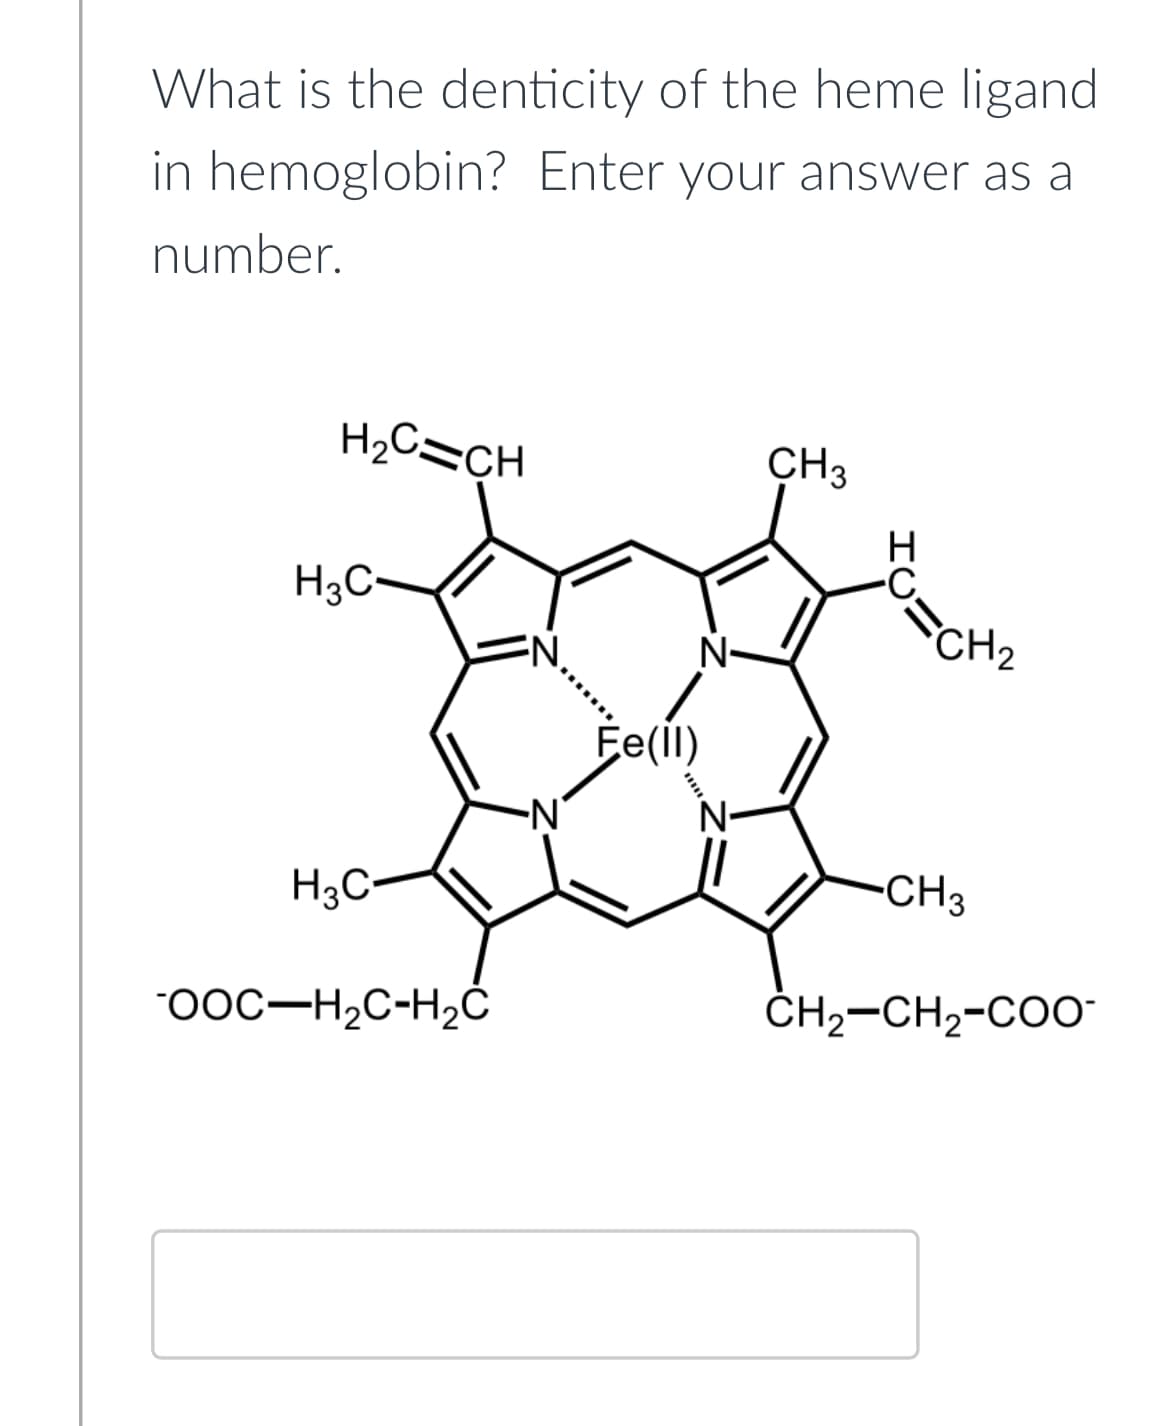 What is the denticity of the heme ligand
in hemoglobin? Enter your answer as a
number.
H₂C=CH
H3C-
H3C-
-OOC-H₂C-H₂C
-N₁
Fe(II)
N-
N-
CH3
H
CH₂
-CH3
CH₂-CH₂-COO-